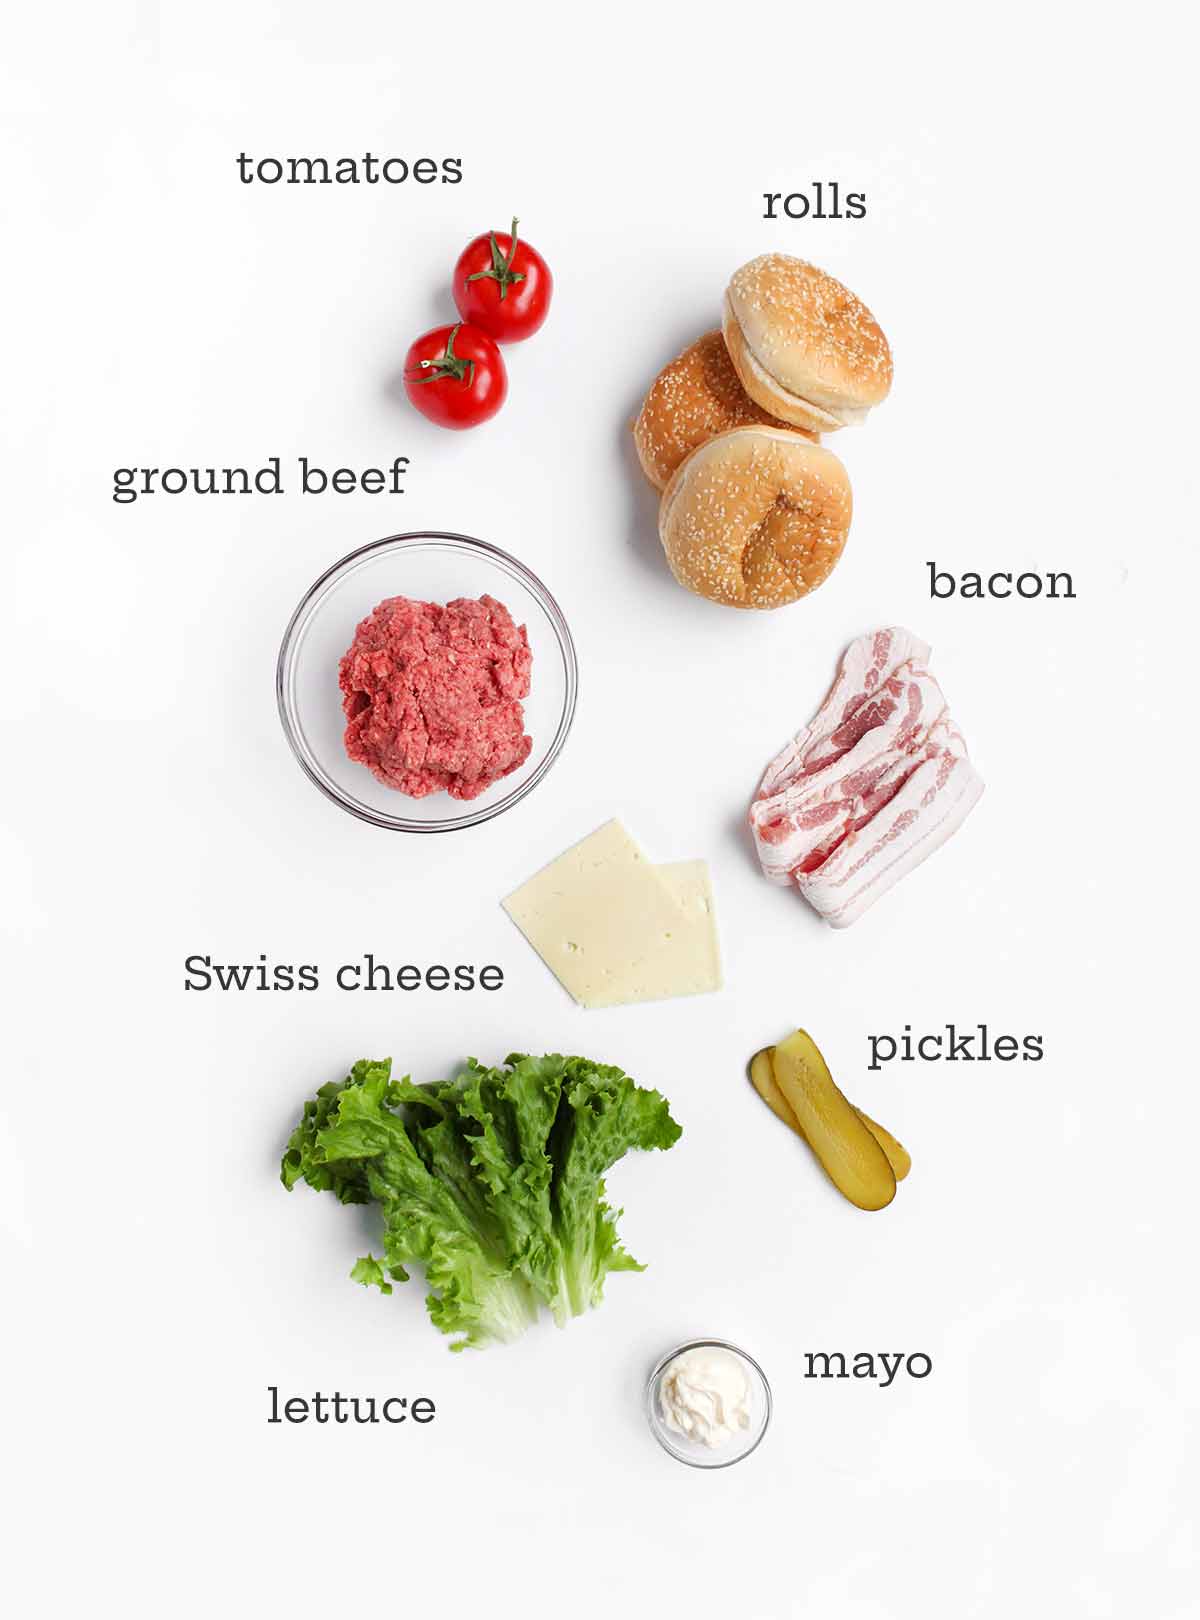 Ingredients for a bacon Swiss burger--beef, rolls, cheese, bacon, tomatoes, pickles, lettuce, and mayo.